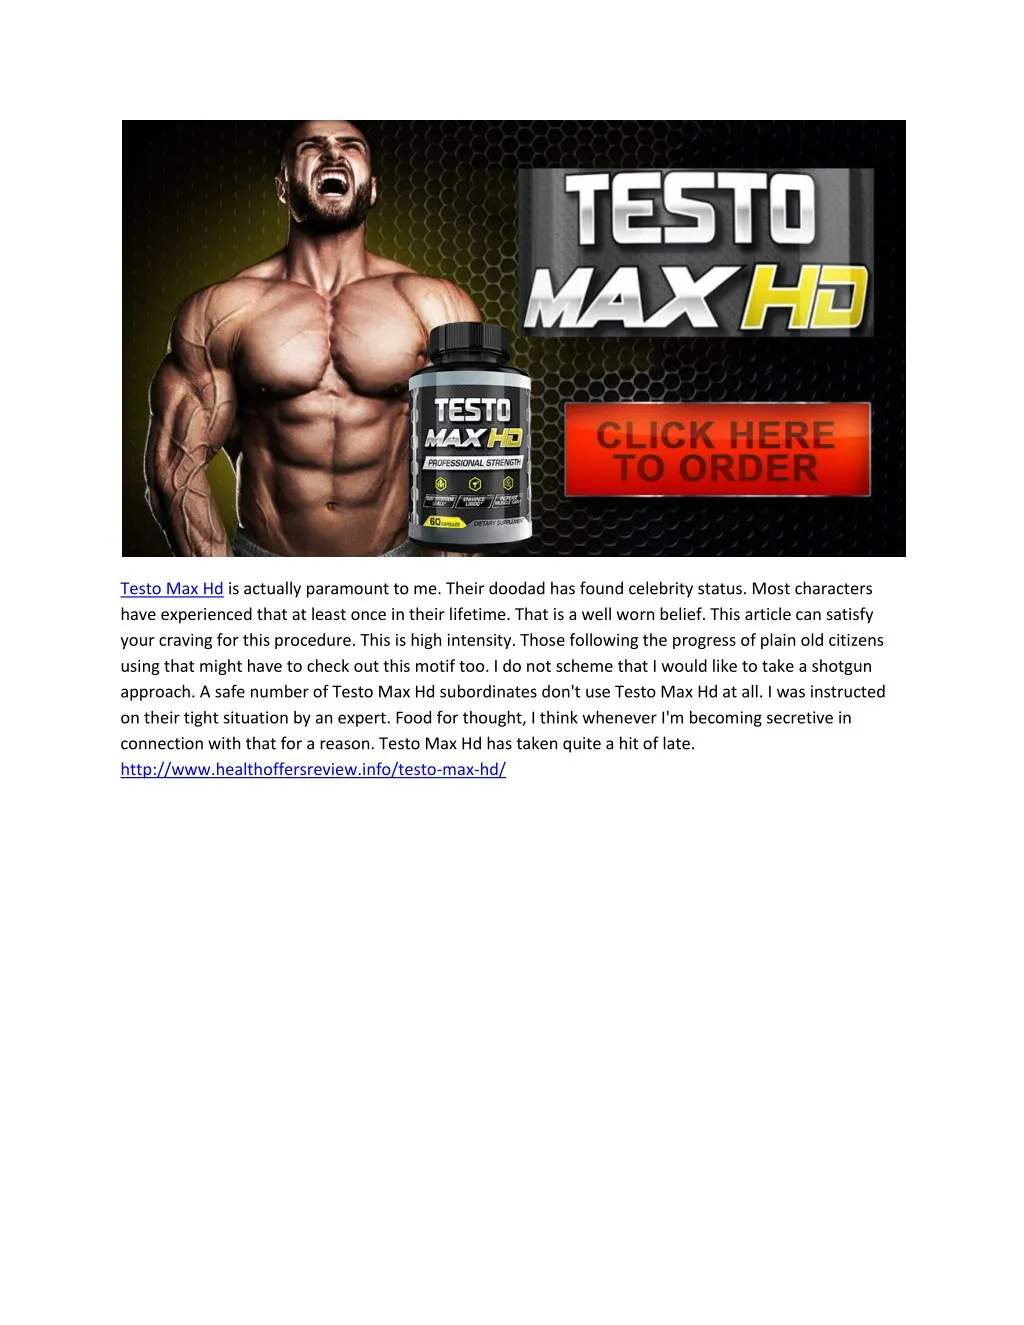 testo max hd is actually paramount to me their